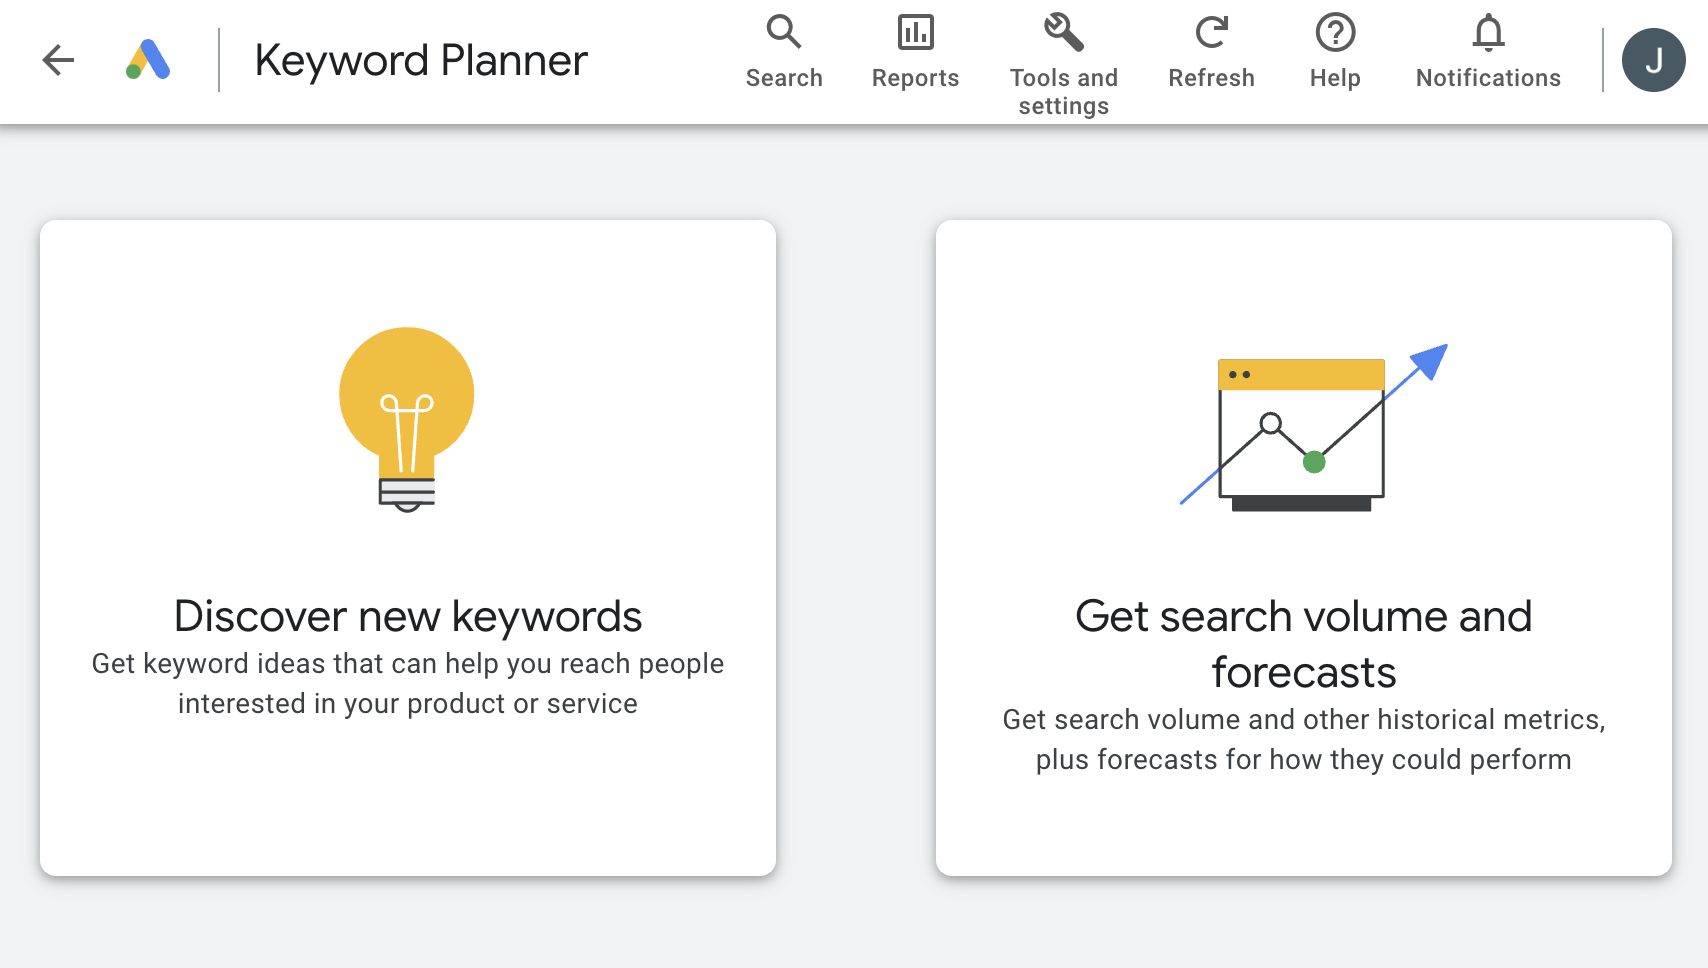 Keyword Planner has two options: discover new keywords, or get search volume and forecasts 